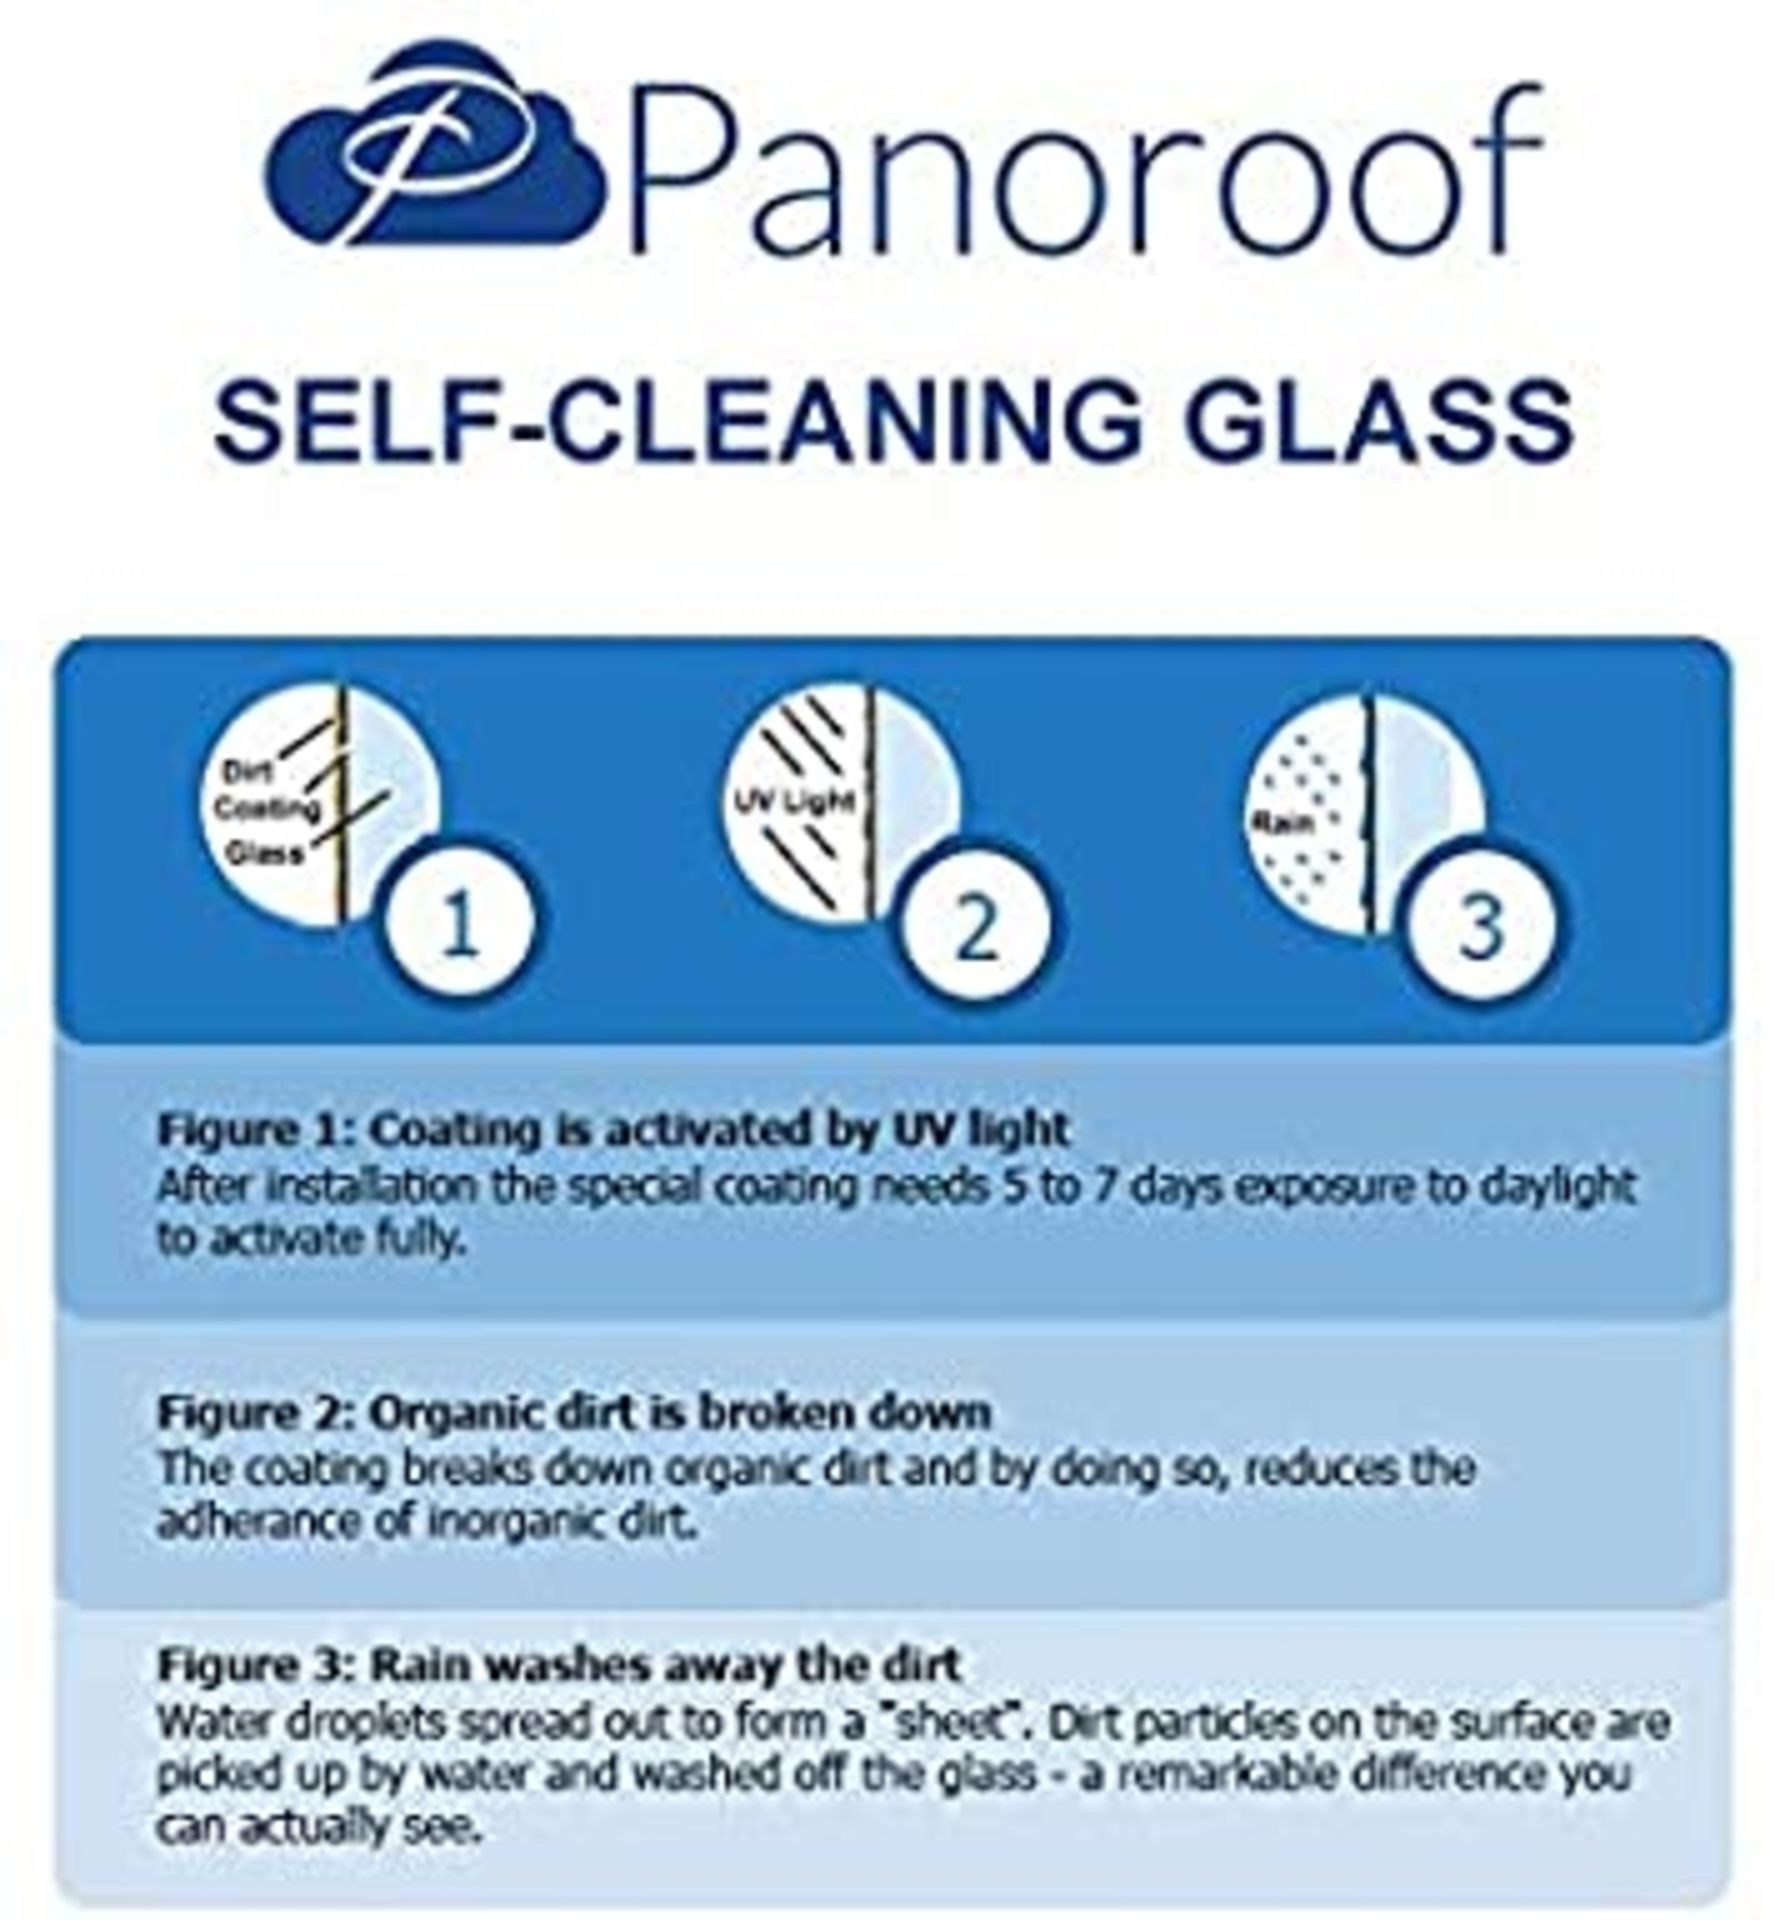 """Panoroof Triple Glazed Self Cleaning 600x1200mm (inside Size Visable glass area) Seamless Glass - Image 6 of 6